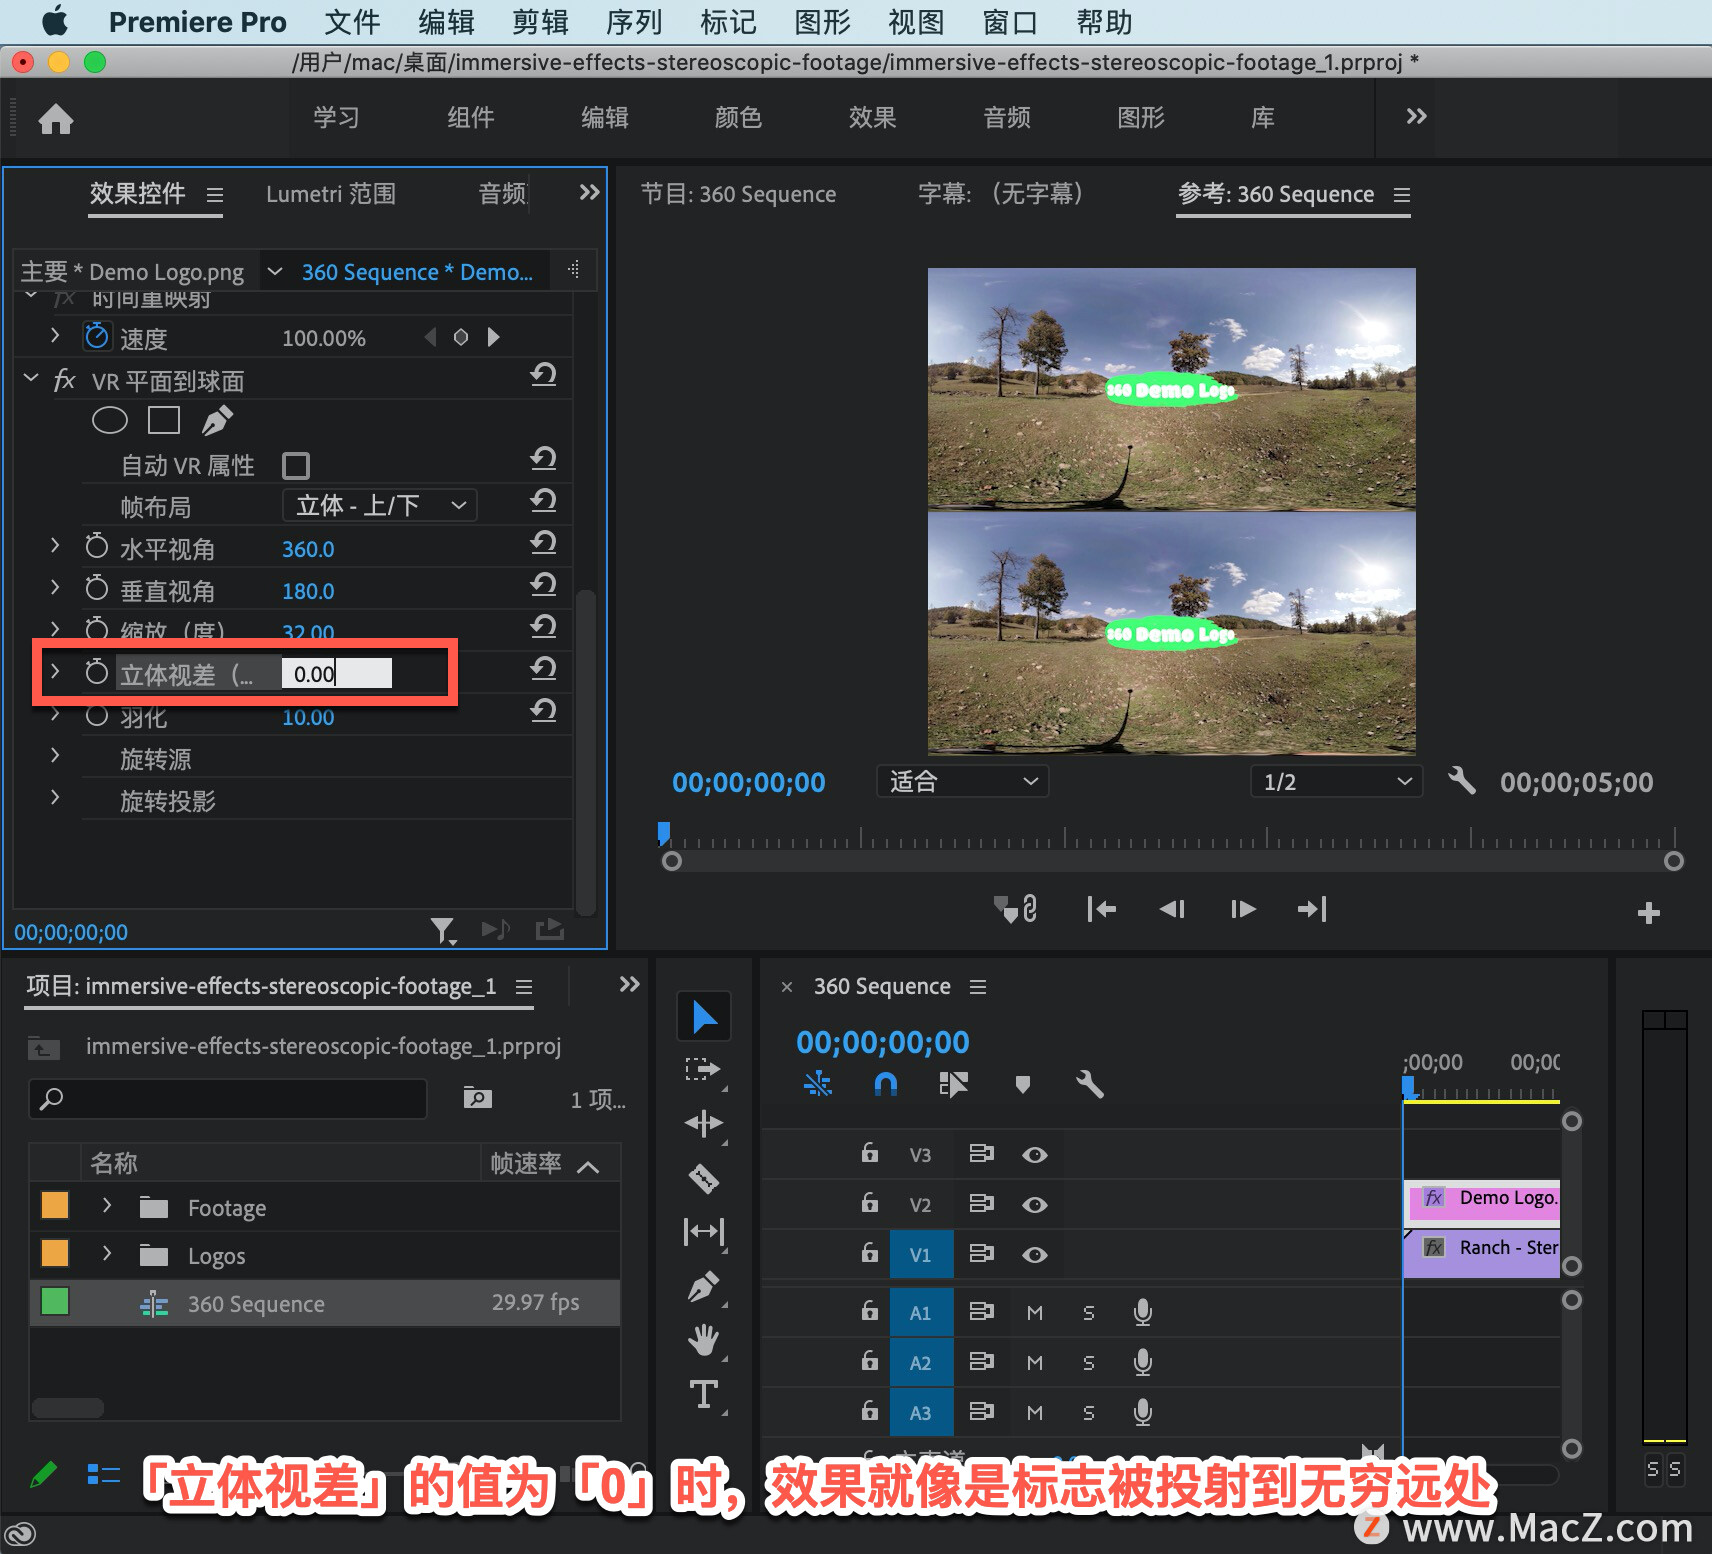 After Effects 教程「78」，如何在 After Effects 中对立体视频应用沉浸式视频效果？